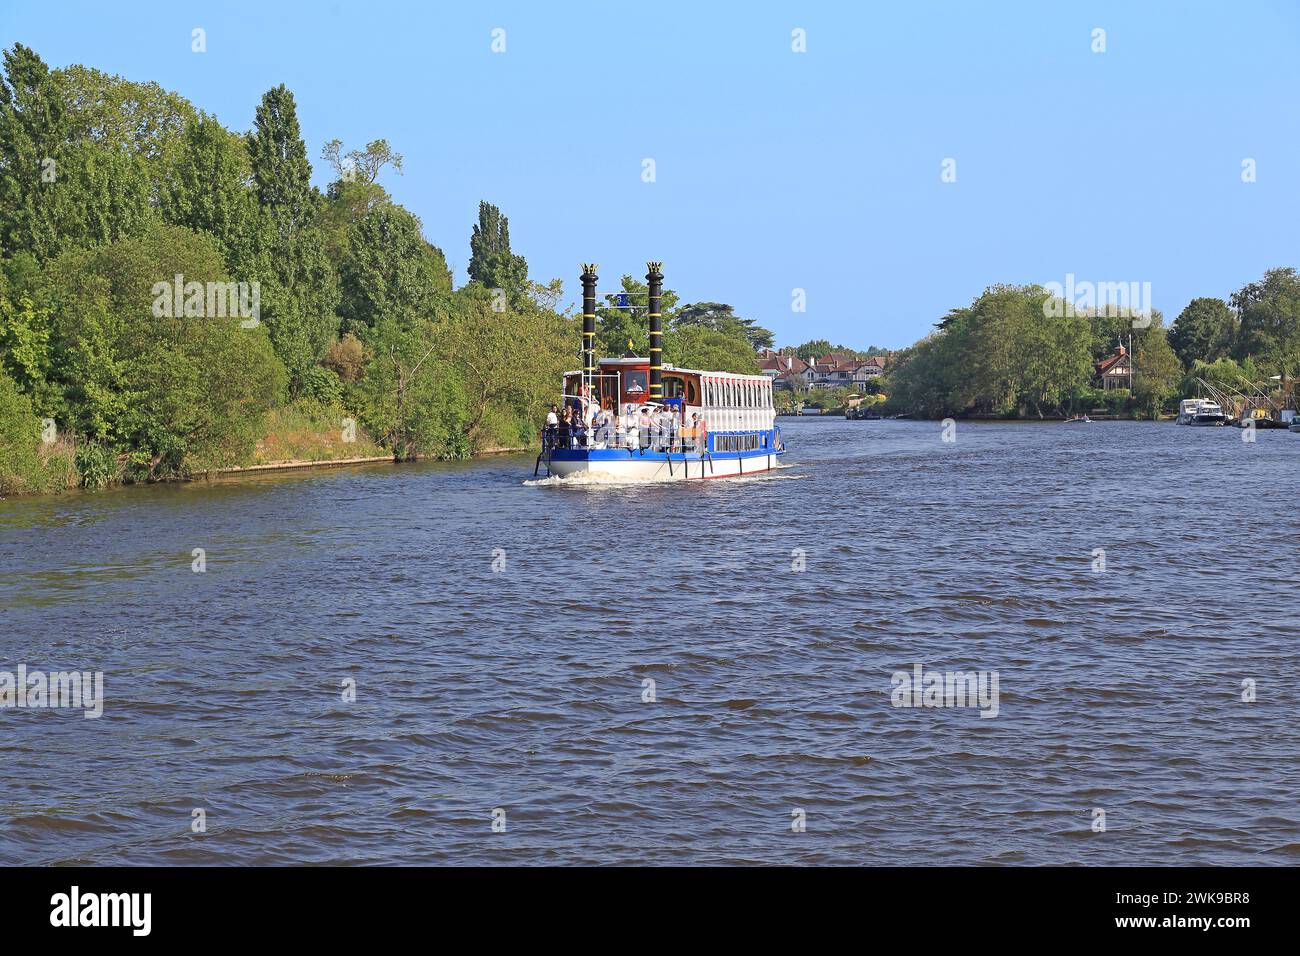 HAMPTON, GREAT BRITAIN - MAY 18, 2014: It is a retro steamer with people on a river walk along the Thames. Stock Photo